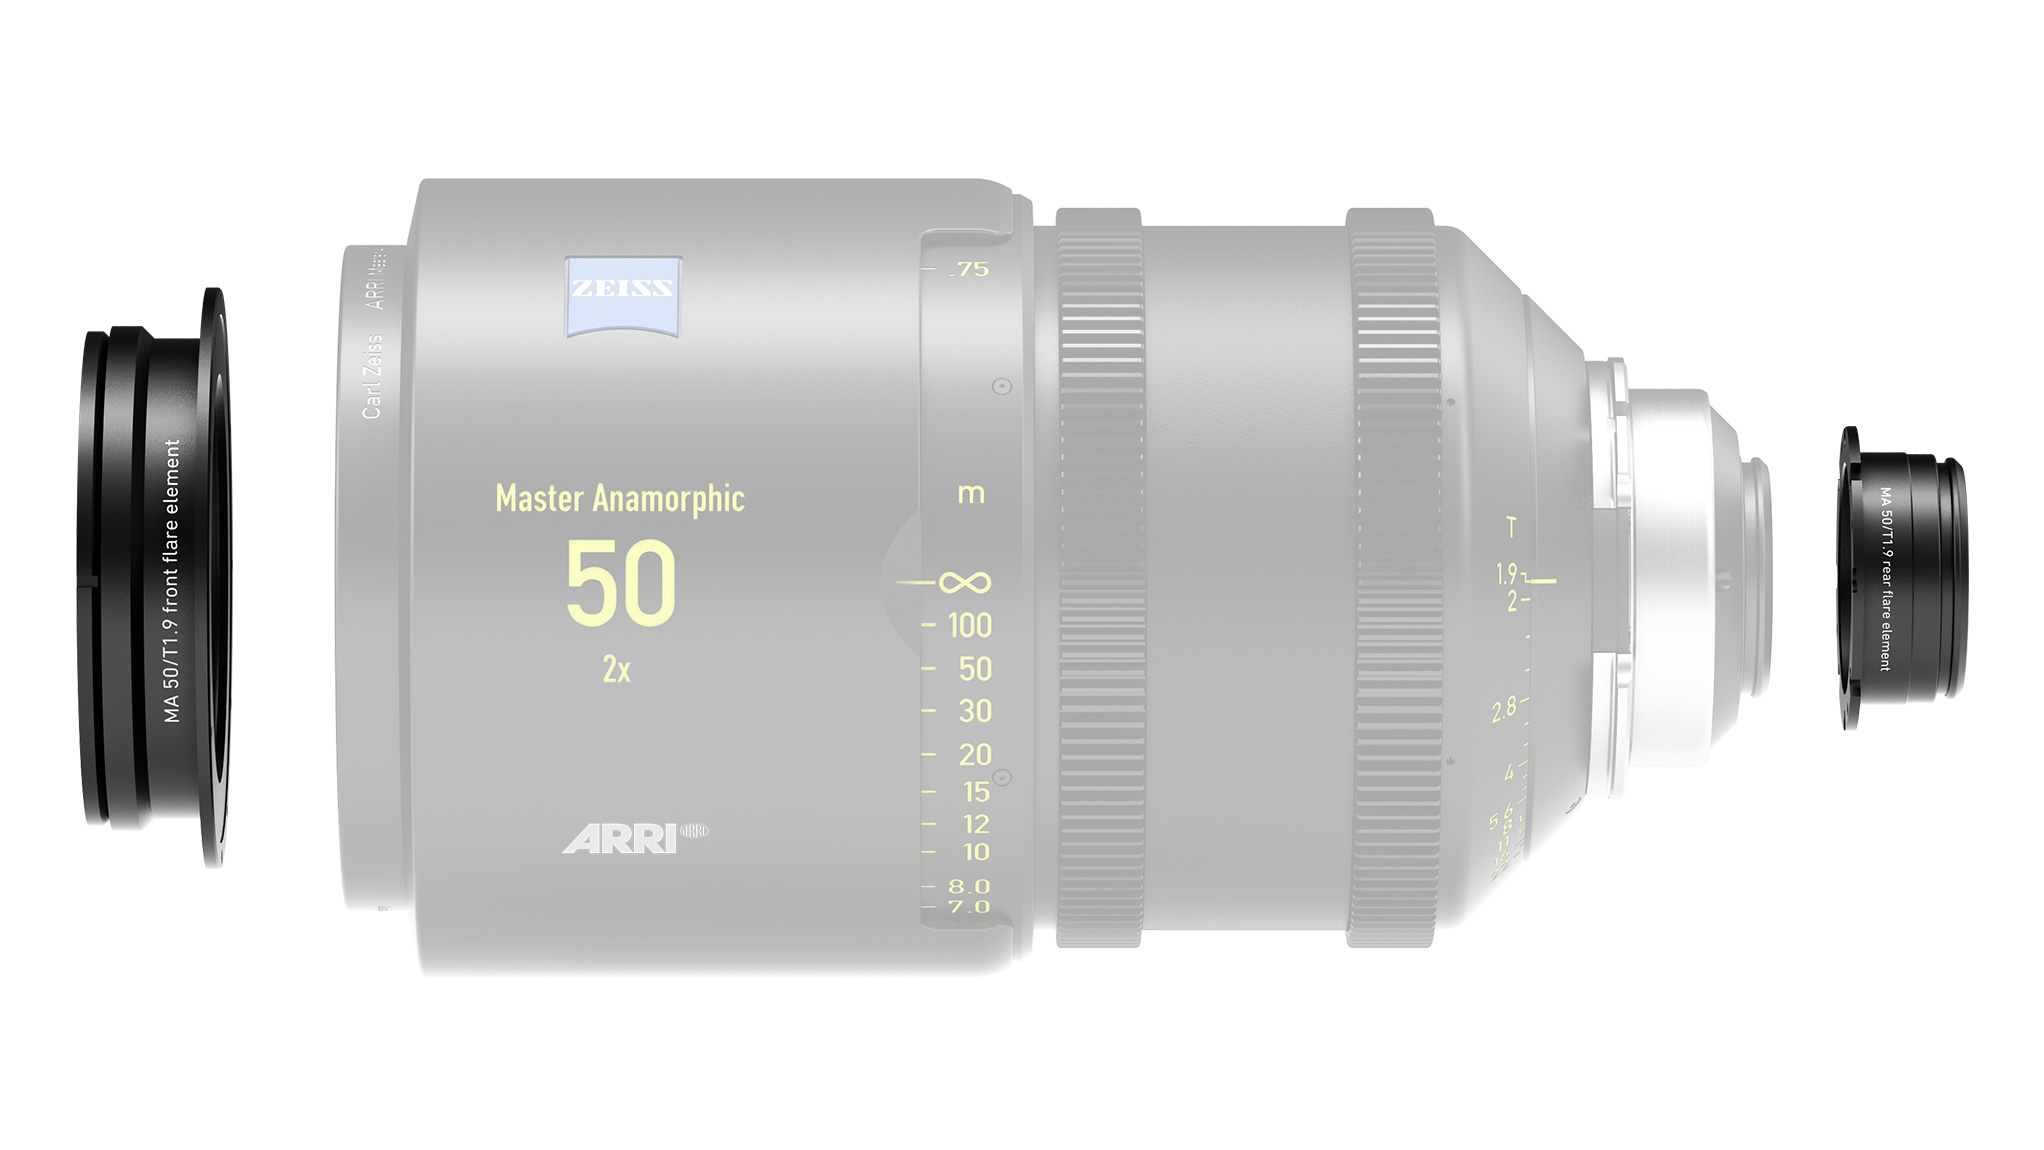 lenses-master-anamorphic-flare-sets-overview-image-data